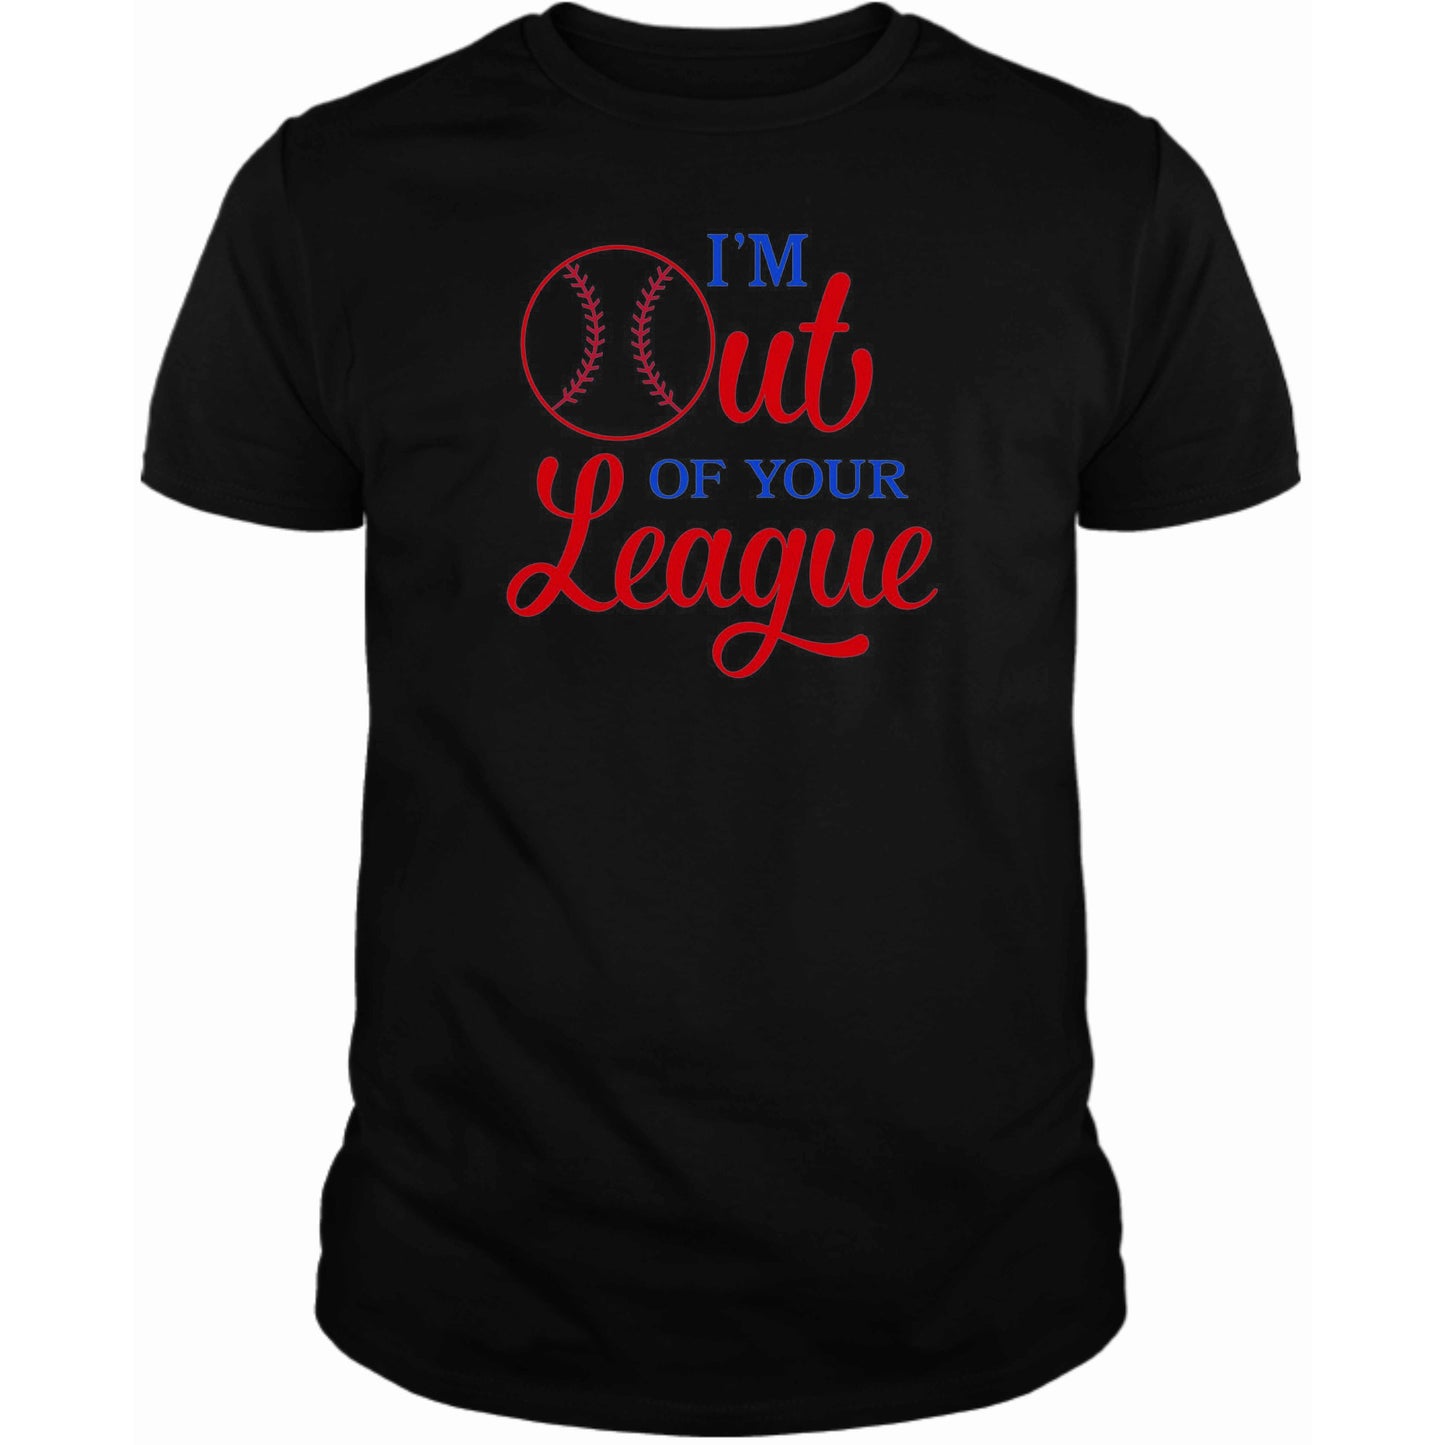 I'm Out of your League T-Shirt